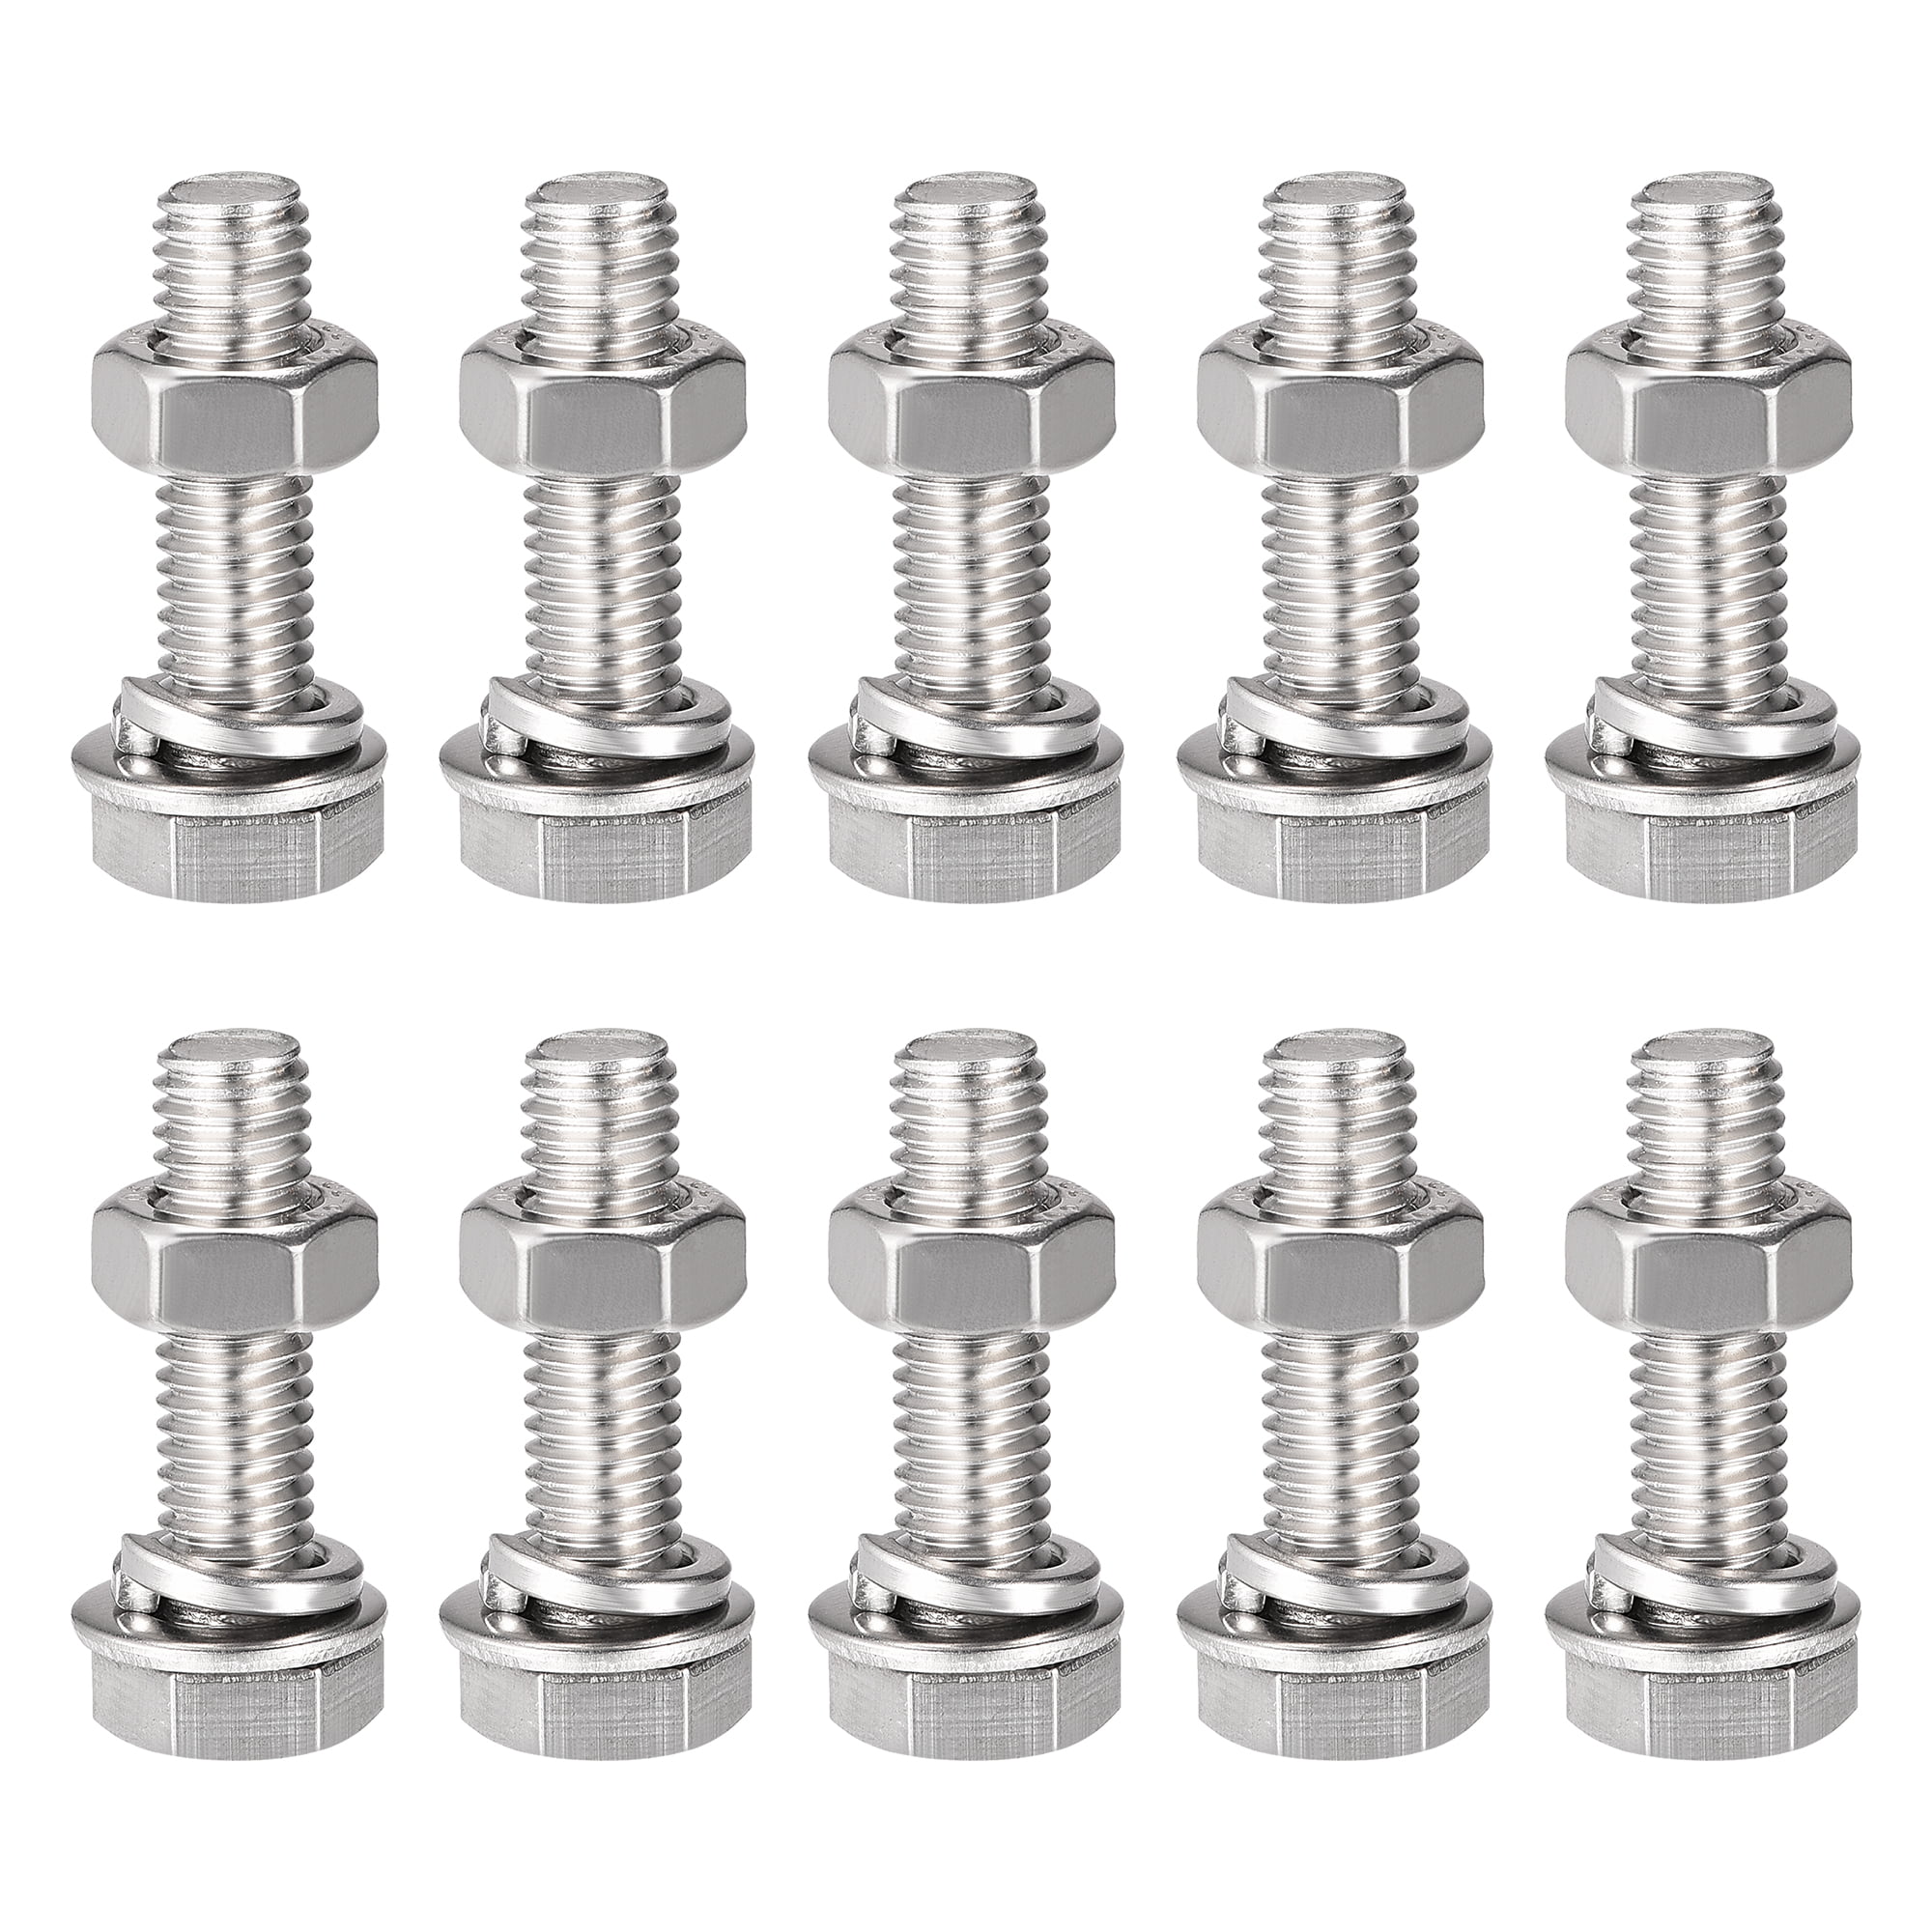 Uxcell M8 x 30mm 304 Stainless Steel Hex Head Screws Bolts, Nuts